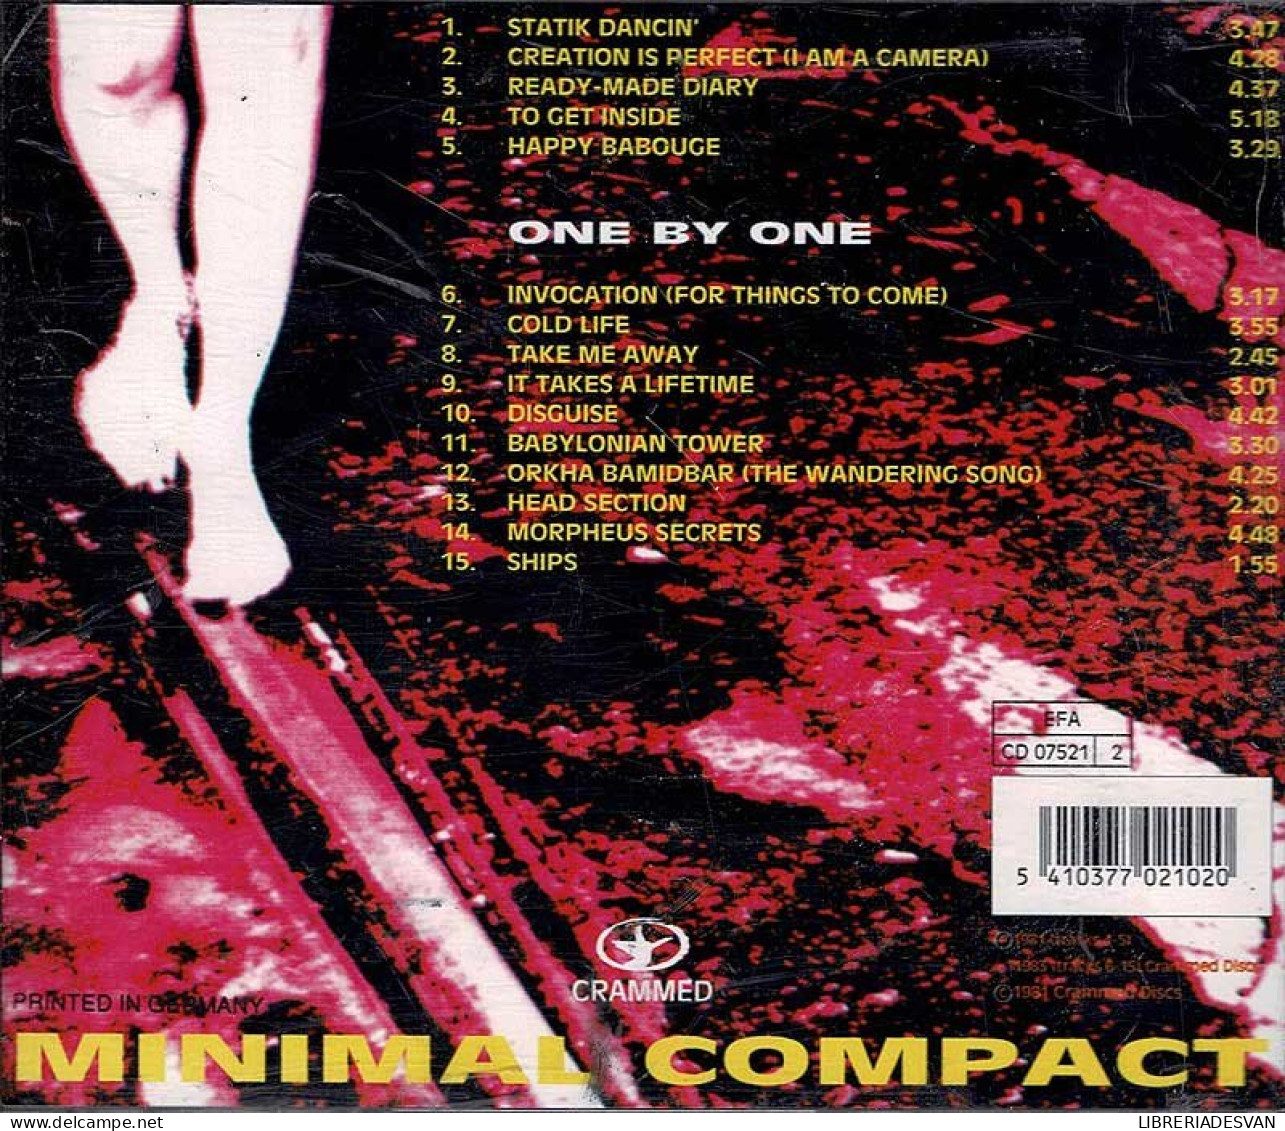 Minimal Compact - One + One By One. CD - Rock